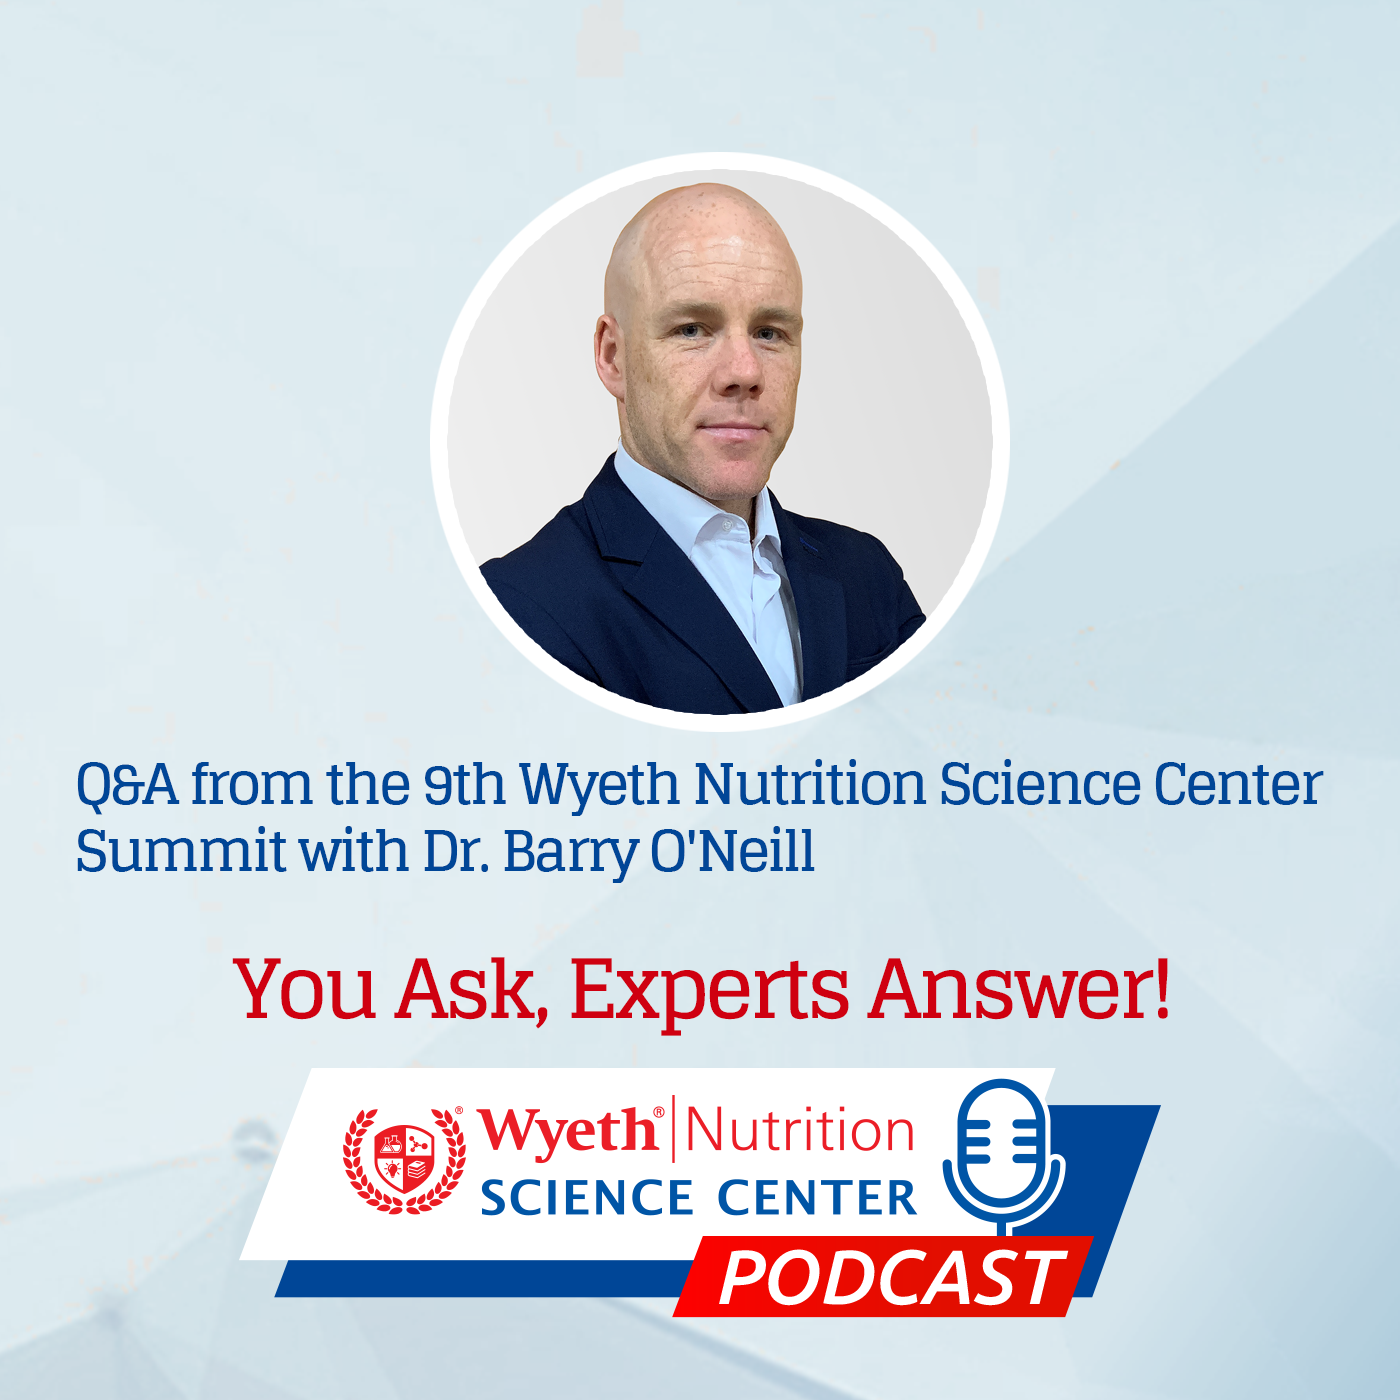 Q&A podcast from the 9th Wyeth Nutrition Science Center Summit with Dr. Barry O'Neill